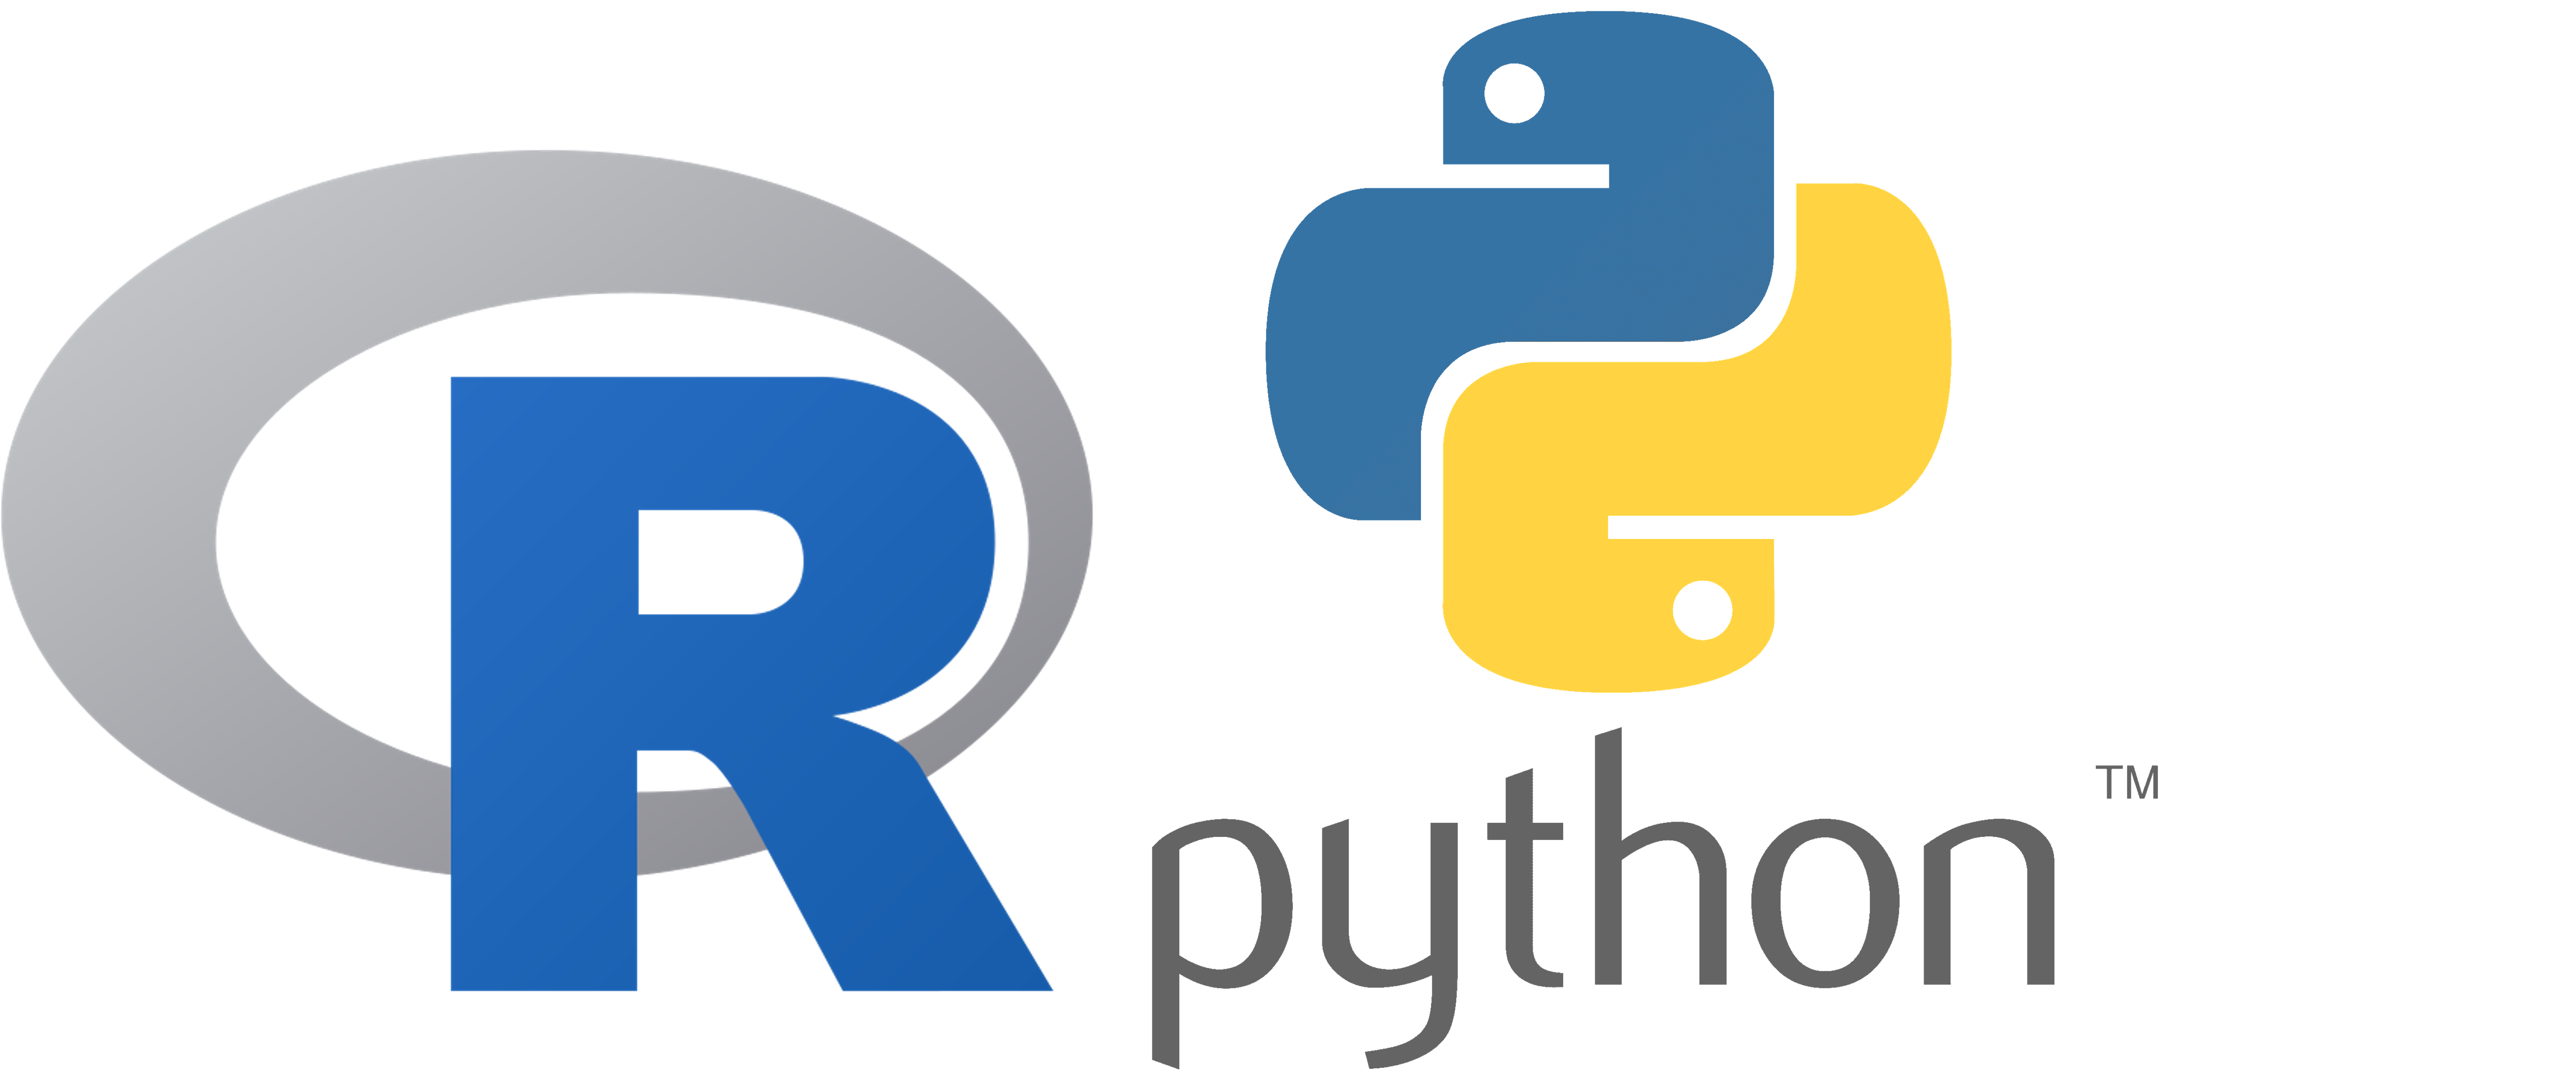 R logo, large letter R, and Python logo, the words Python under a blue and yellow symbol